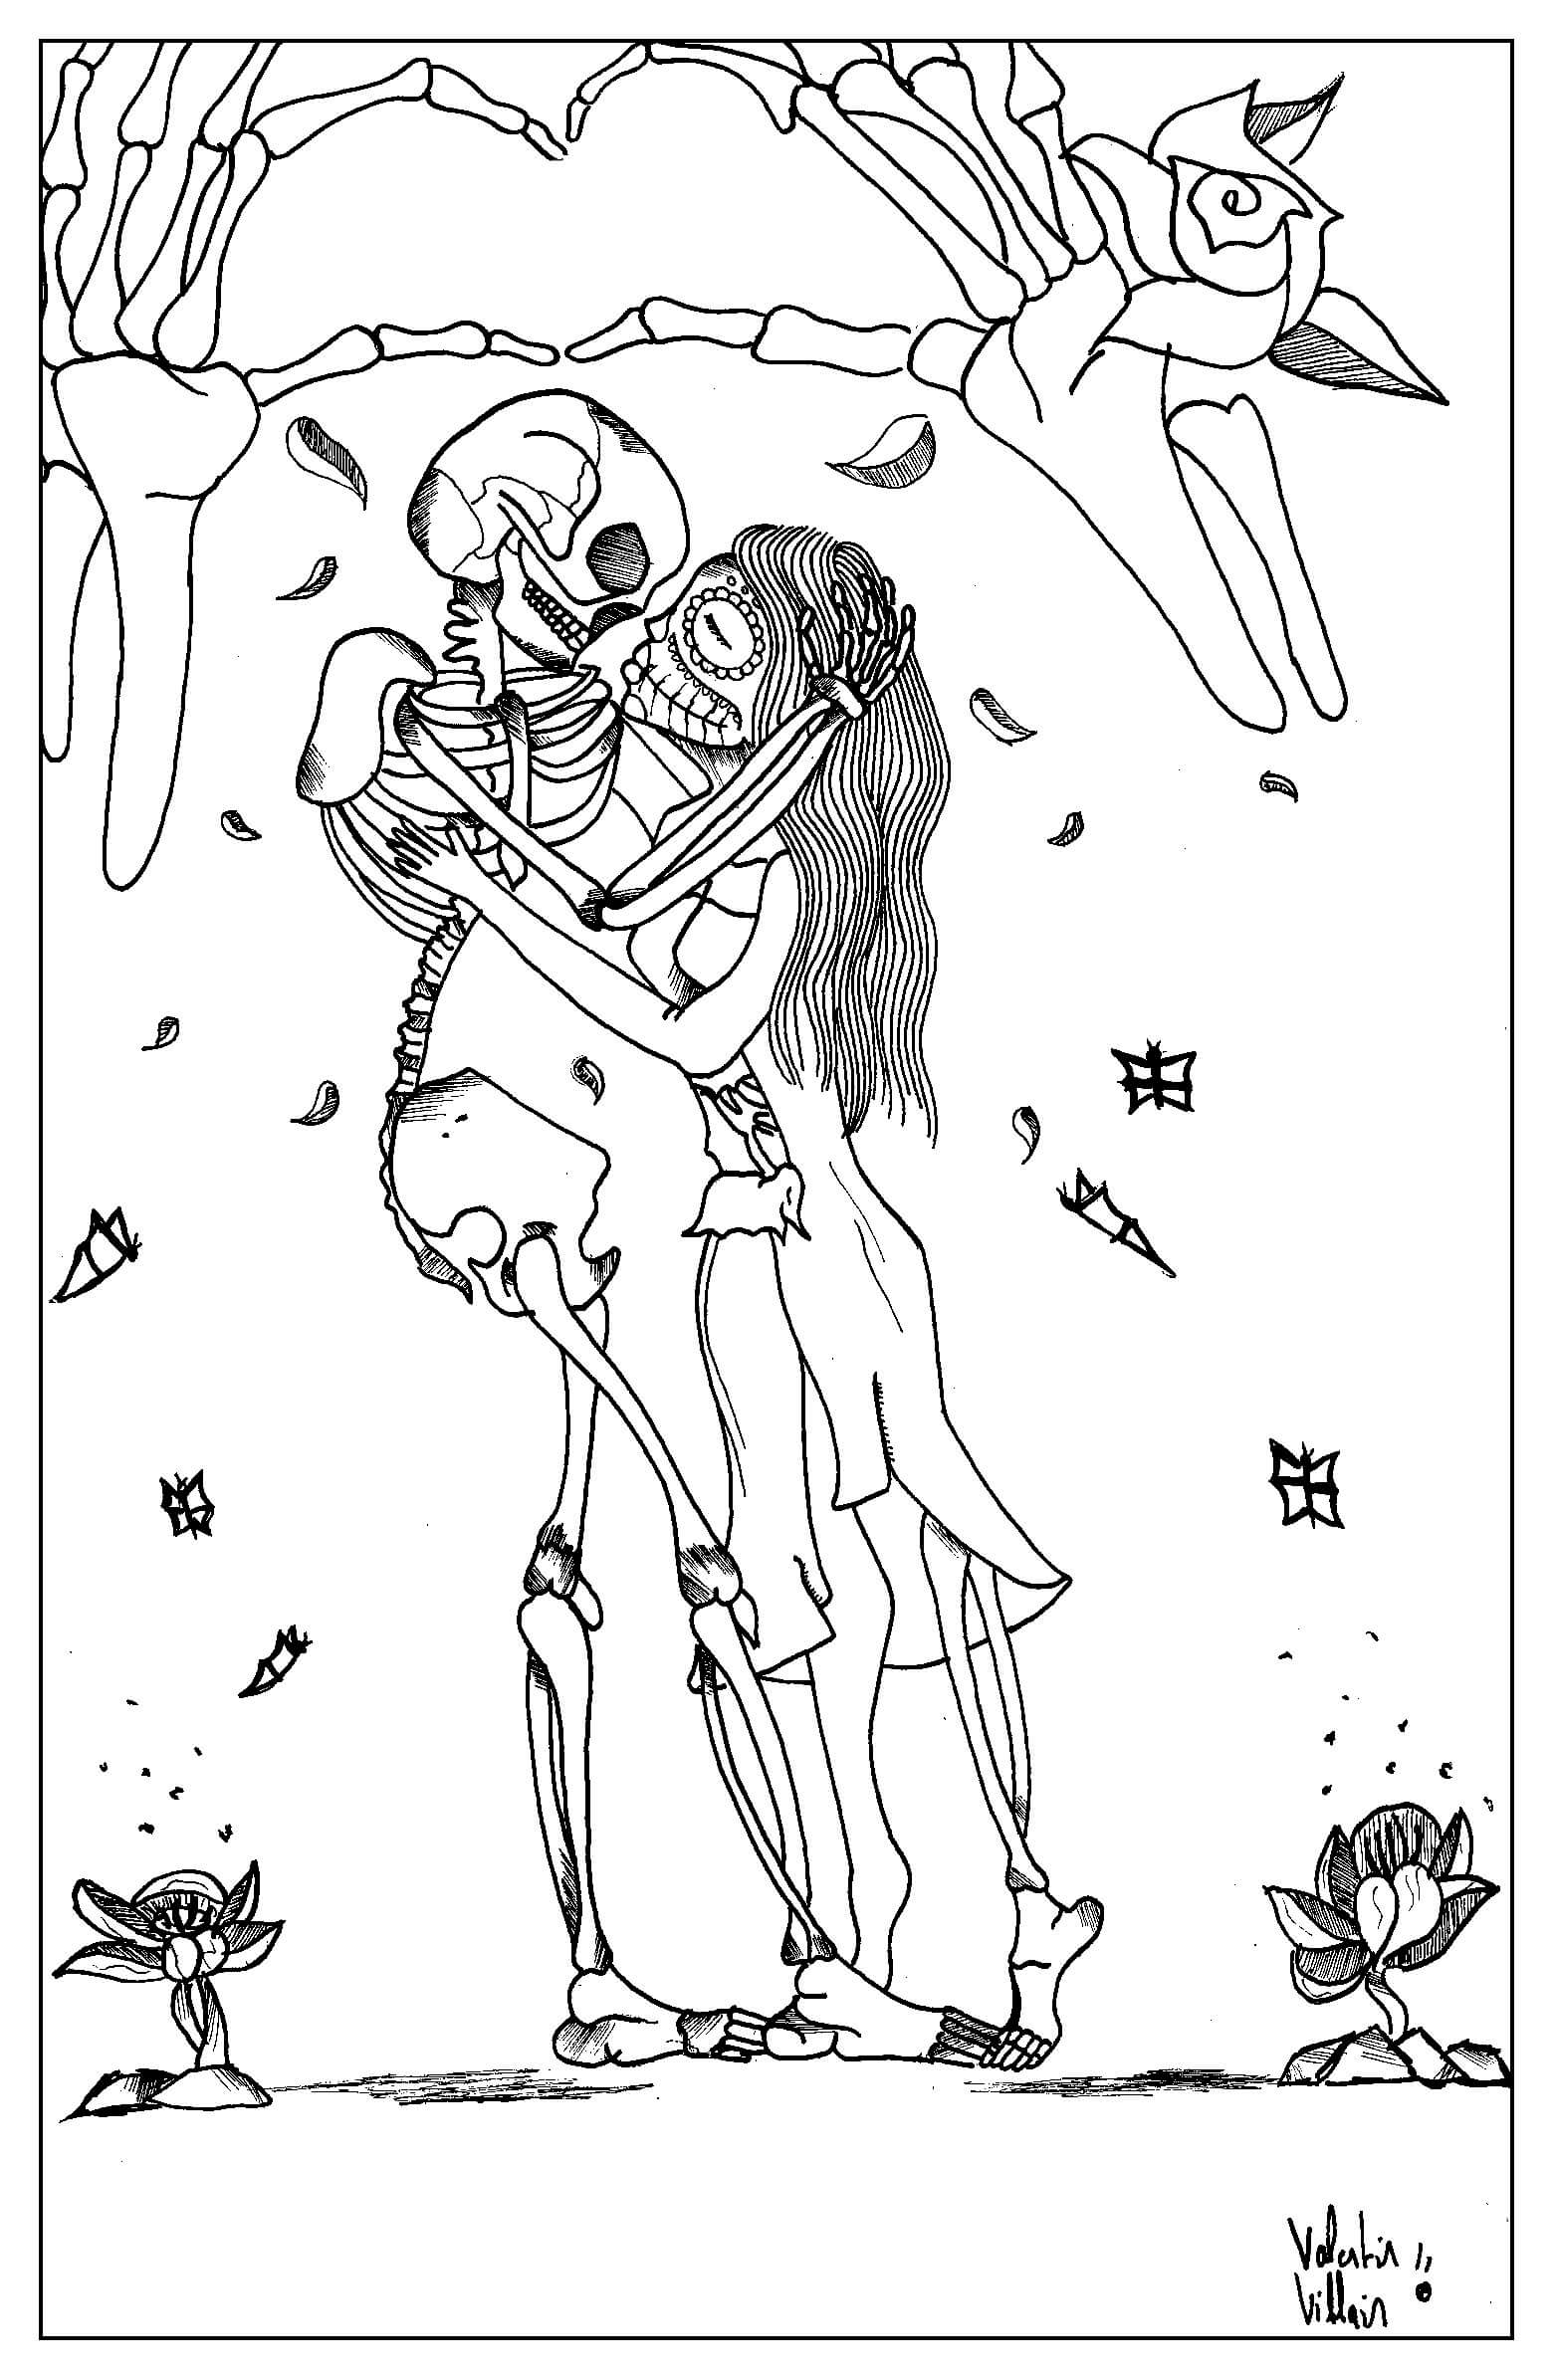 Romantic Skeletons Valentines Day Coloring Page for Adults